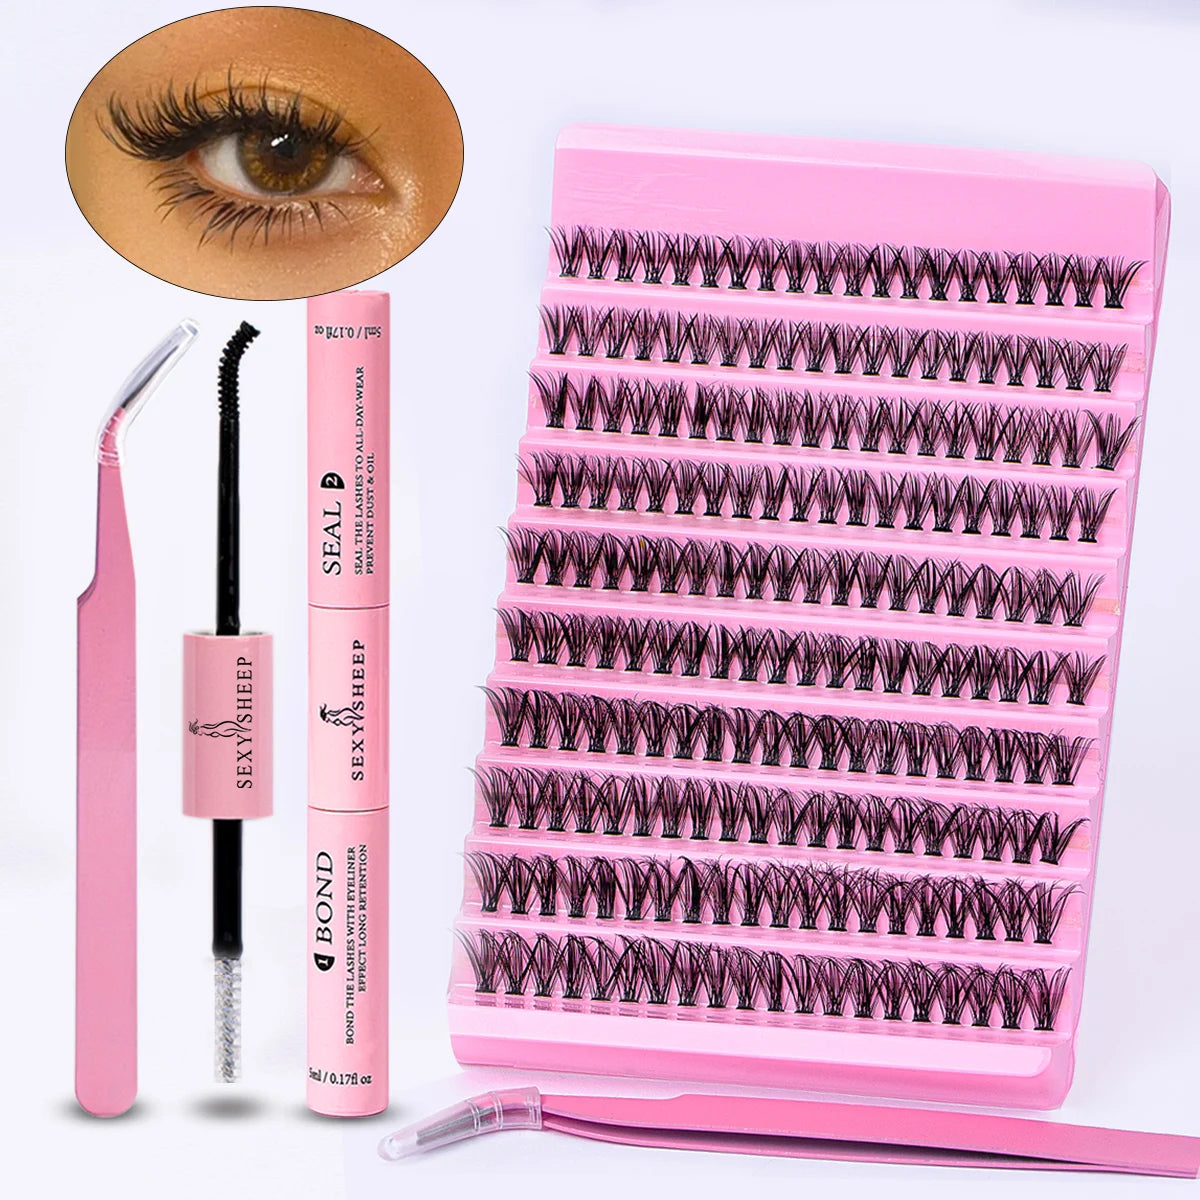 DIY Eyelash Extension Kit 200Pcs Individual Lashes Cluster D Curl, 8-16Mm Mix Lash Clusters with Lash Bond and Seal and Lash App